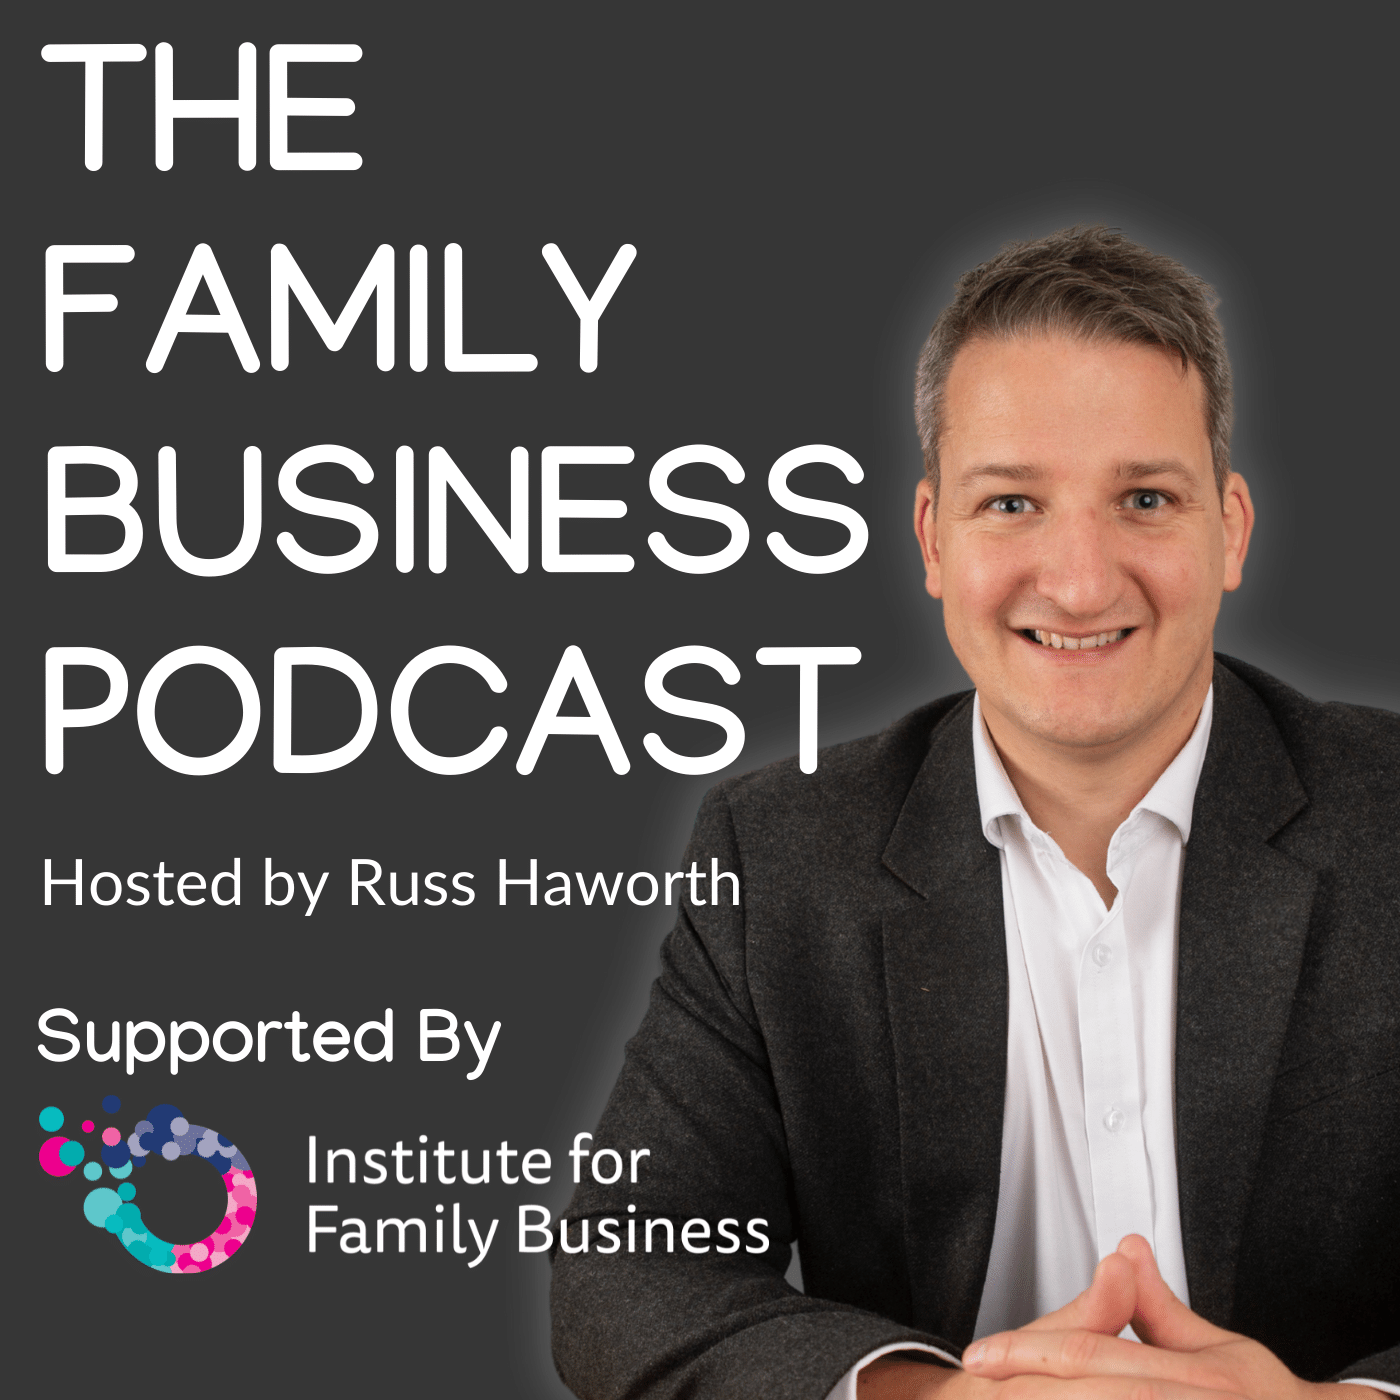 Artwork for podcast The Family Business Podcast